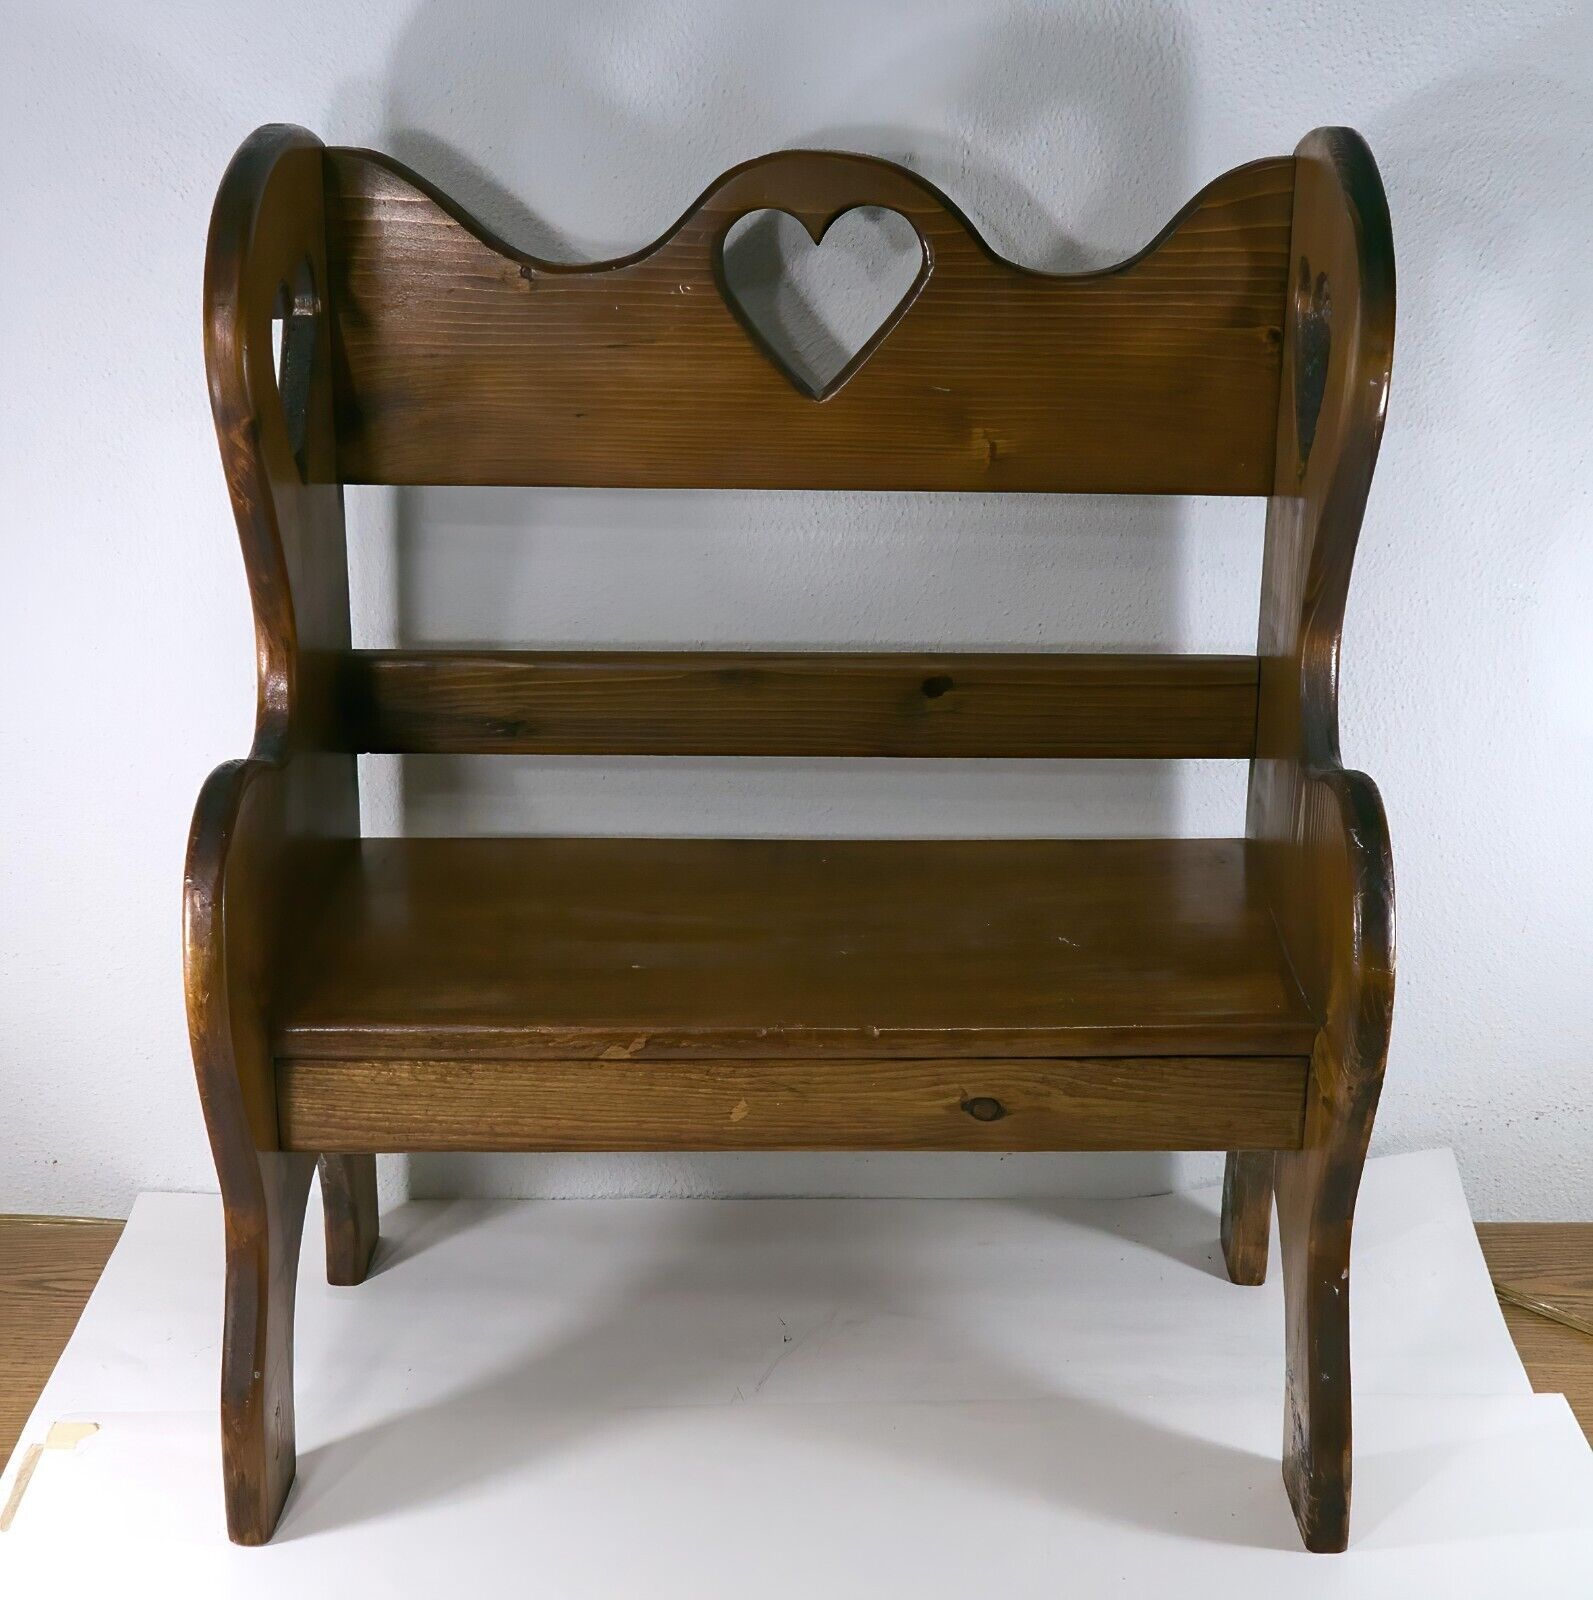 Primary image for Solid Wooden Doll Bench With Hearts 11" Wide x 23" Tall x 19.5" Long